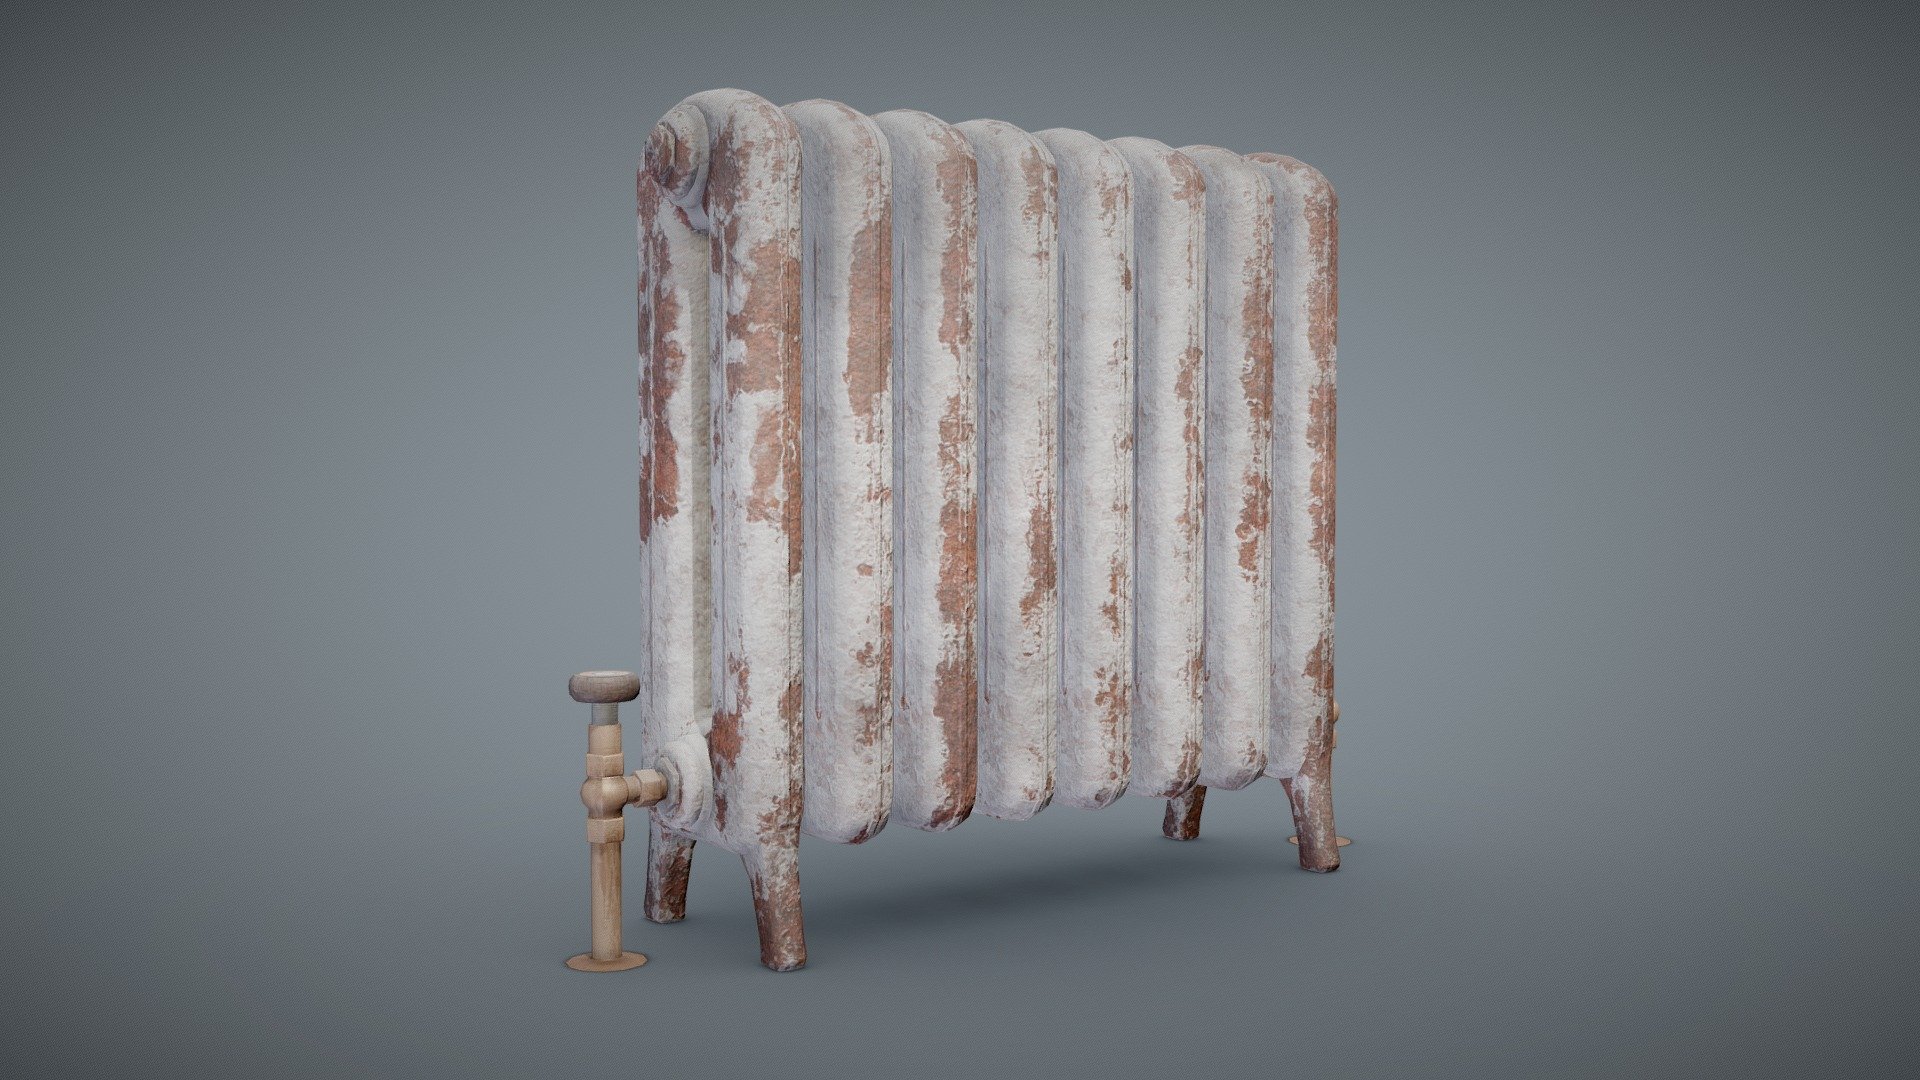 Game-ready vintage rusty iron radiator. 

In additional file you can find:
Textures for Unity5, UnrealEngine4, Unity HDRP, PBR Metal Roughness
LODs and Collision

LOD0:
Verts: 5,258 Tris: 10,540
LOD1: 
Verts: 4,315 Tris: 8,654
LOD2:
Verts: 2,203 Tris: 4,430
LOD3:
Verts: 1,468 Tris: 2,972 - Rusty Radiator (Unity5 & UnrealEngine) - Buy Royalty Free 3D model by NollieInward 3d model